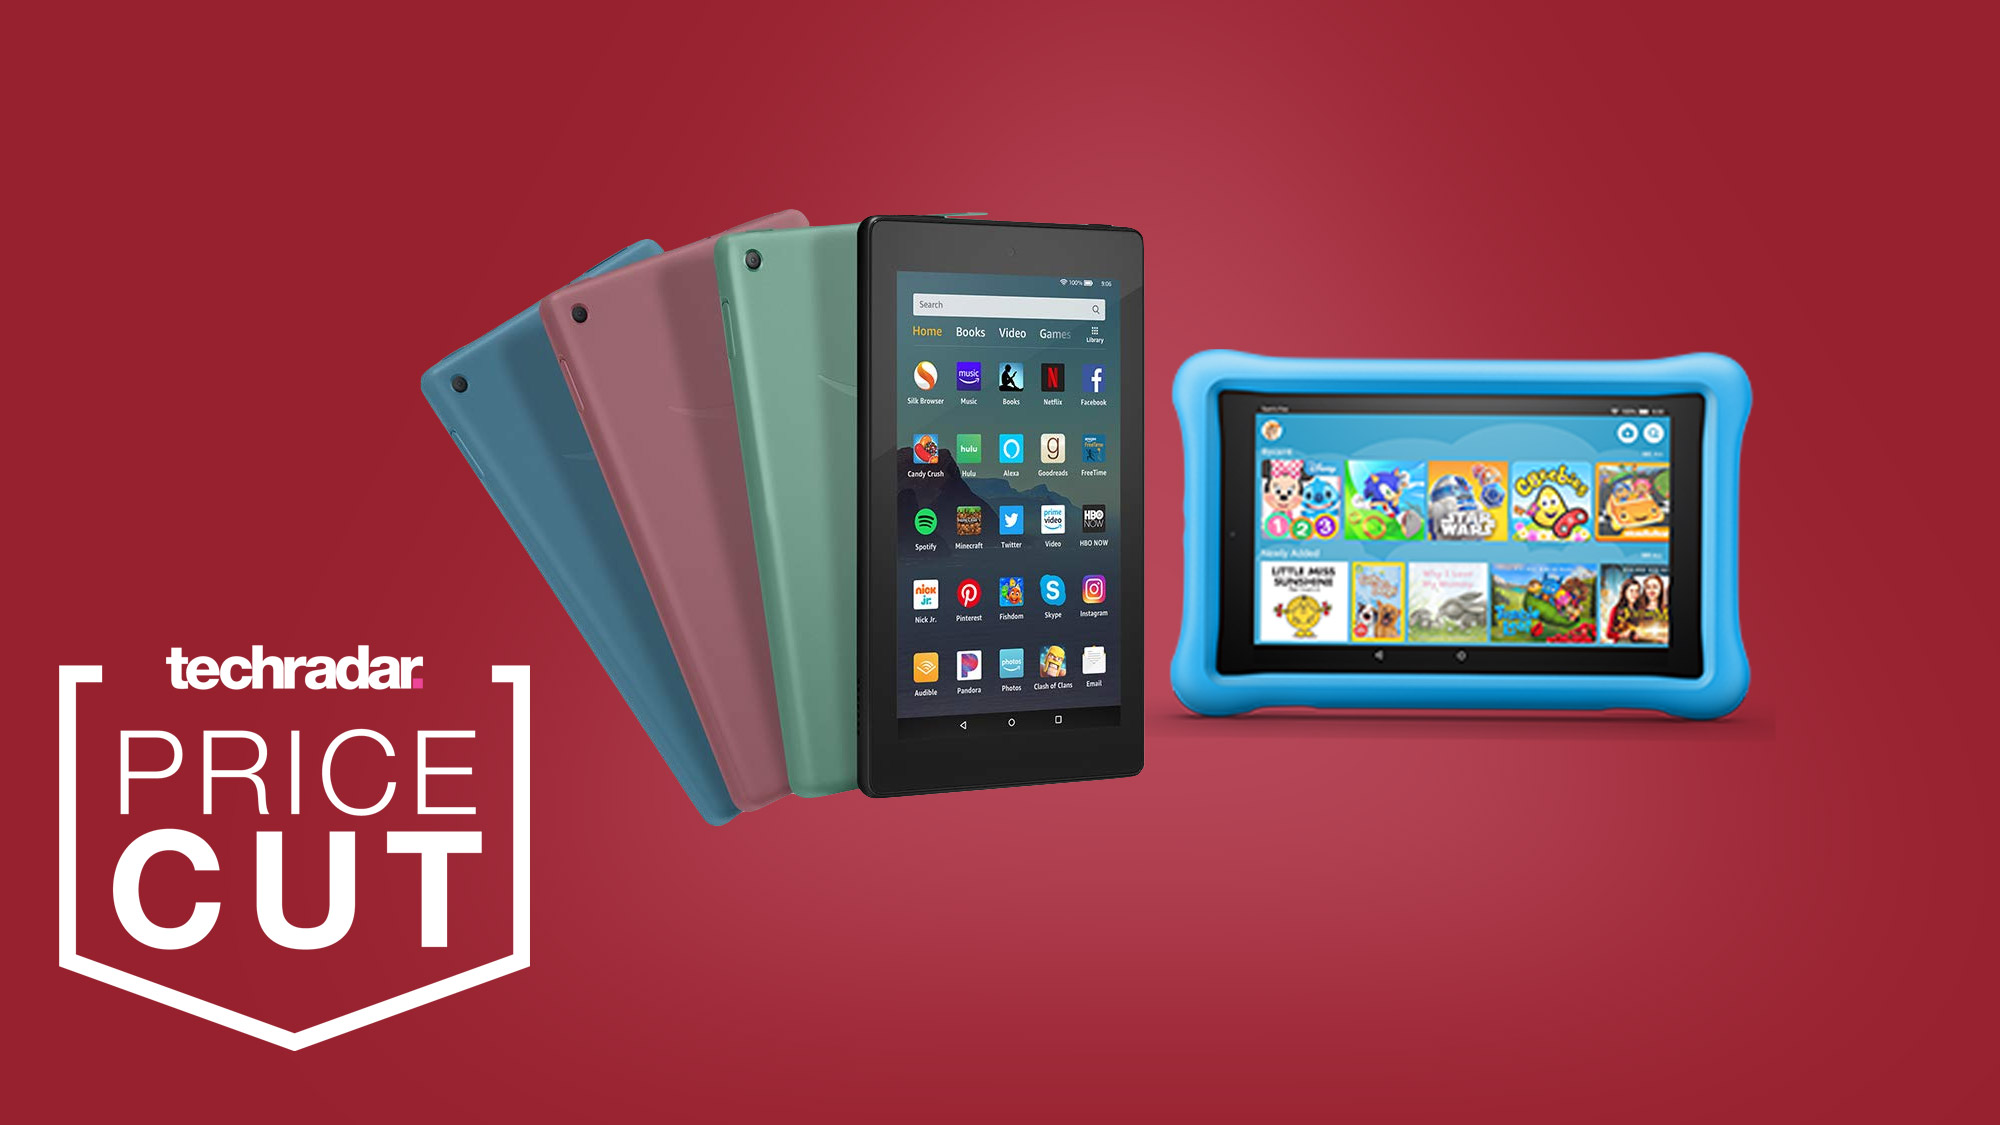 Last-minute tablet deals from Amazon: save on Fire tablets for the whole family